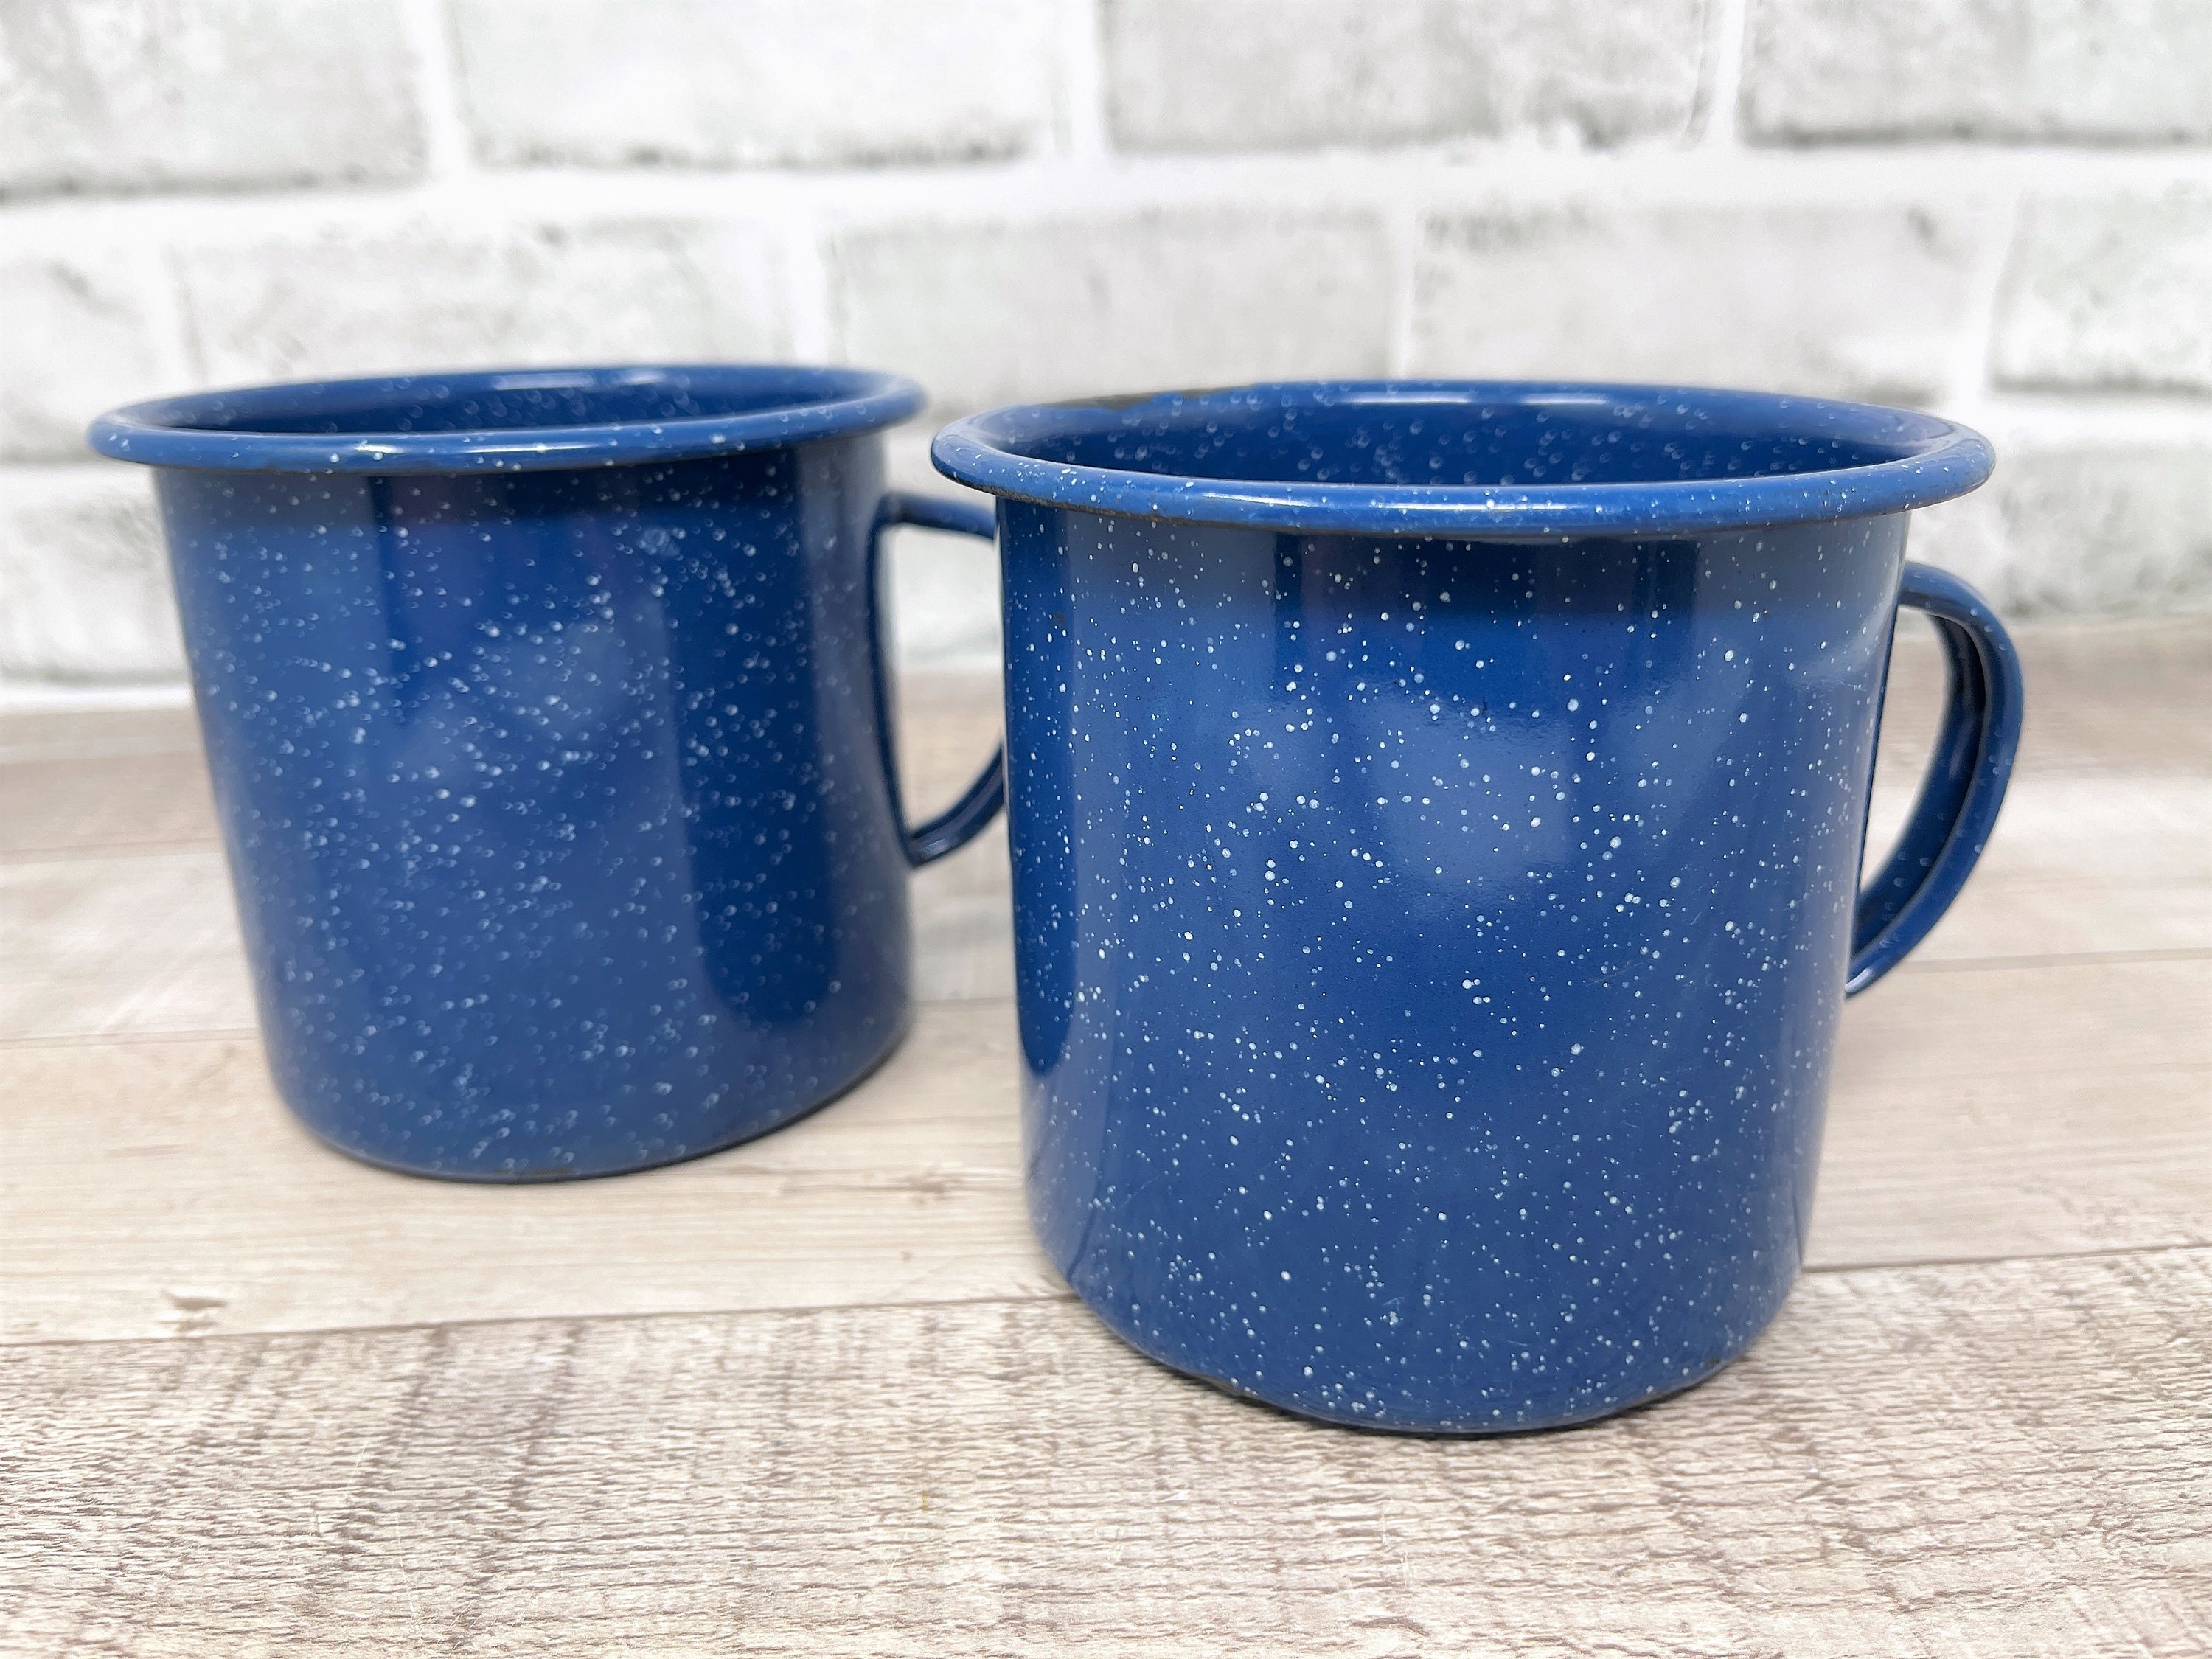 2 Enamel Ware Blue Speckled Metal Coffee Mugs Cup Cabin Camping Farmhouse